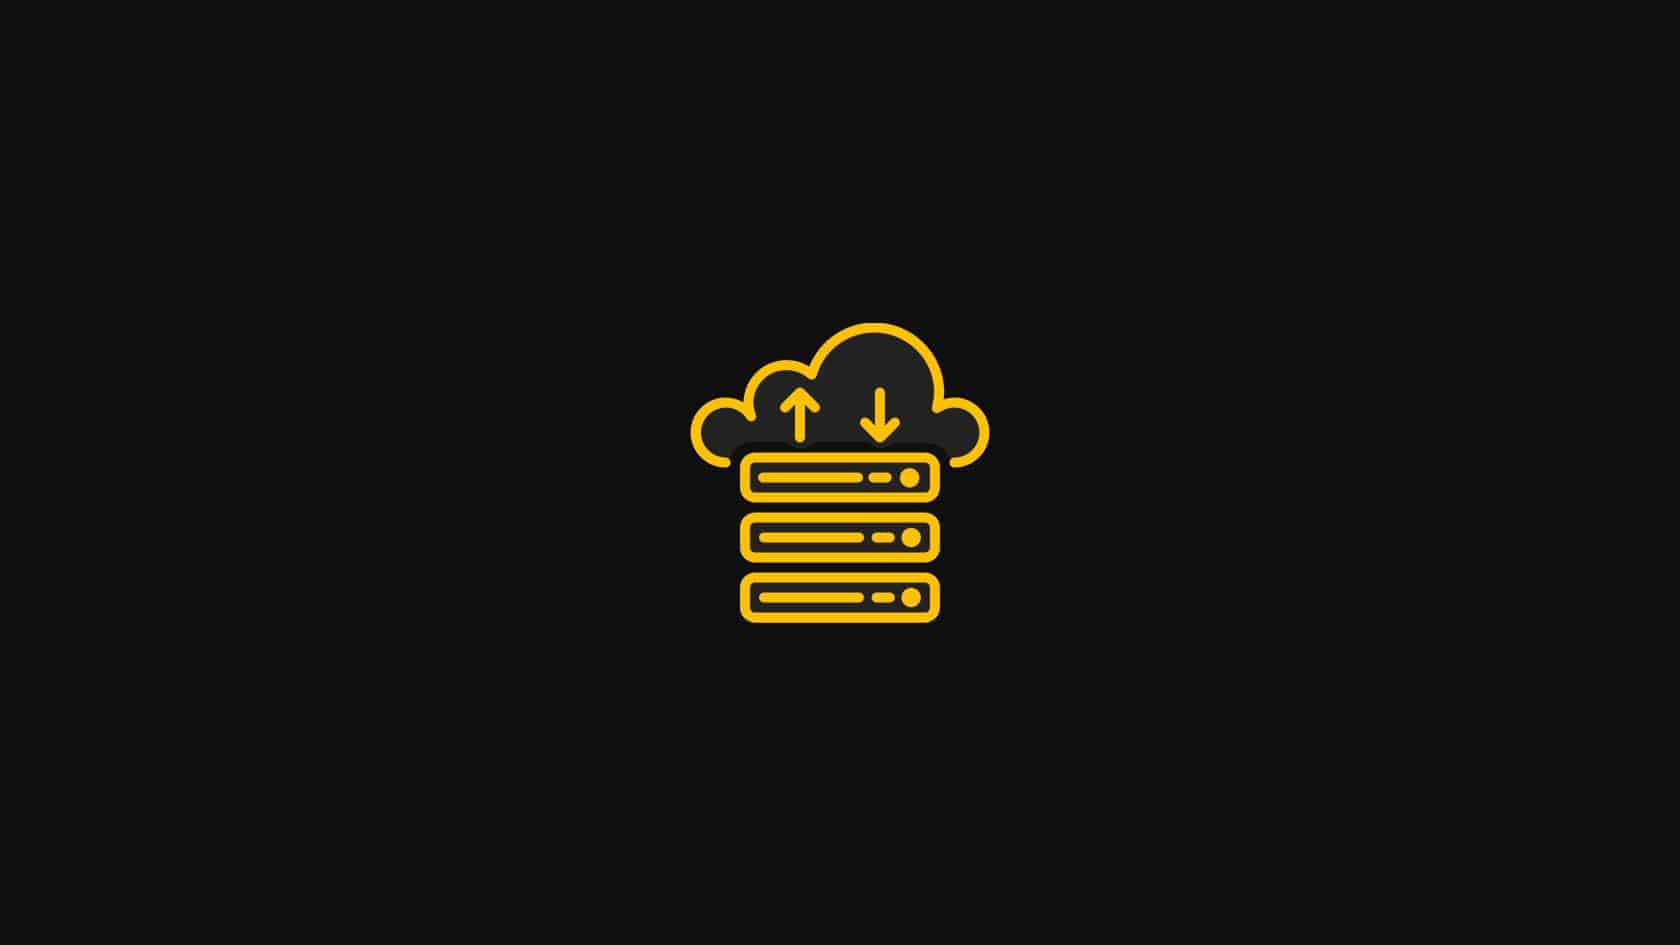 sever icon with cloud